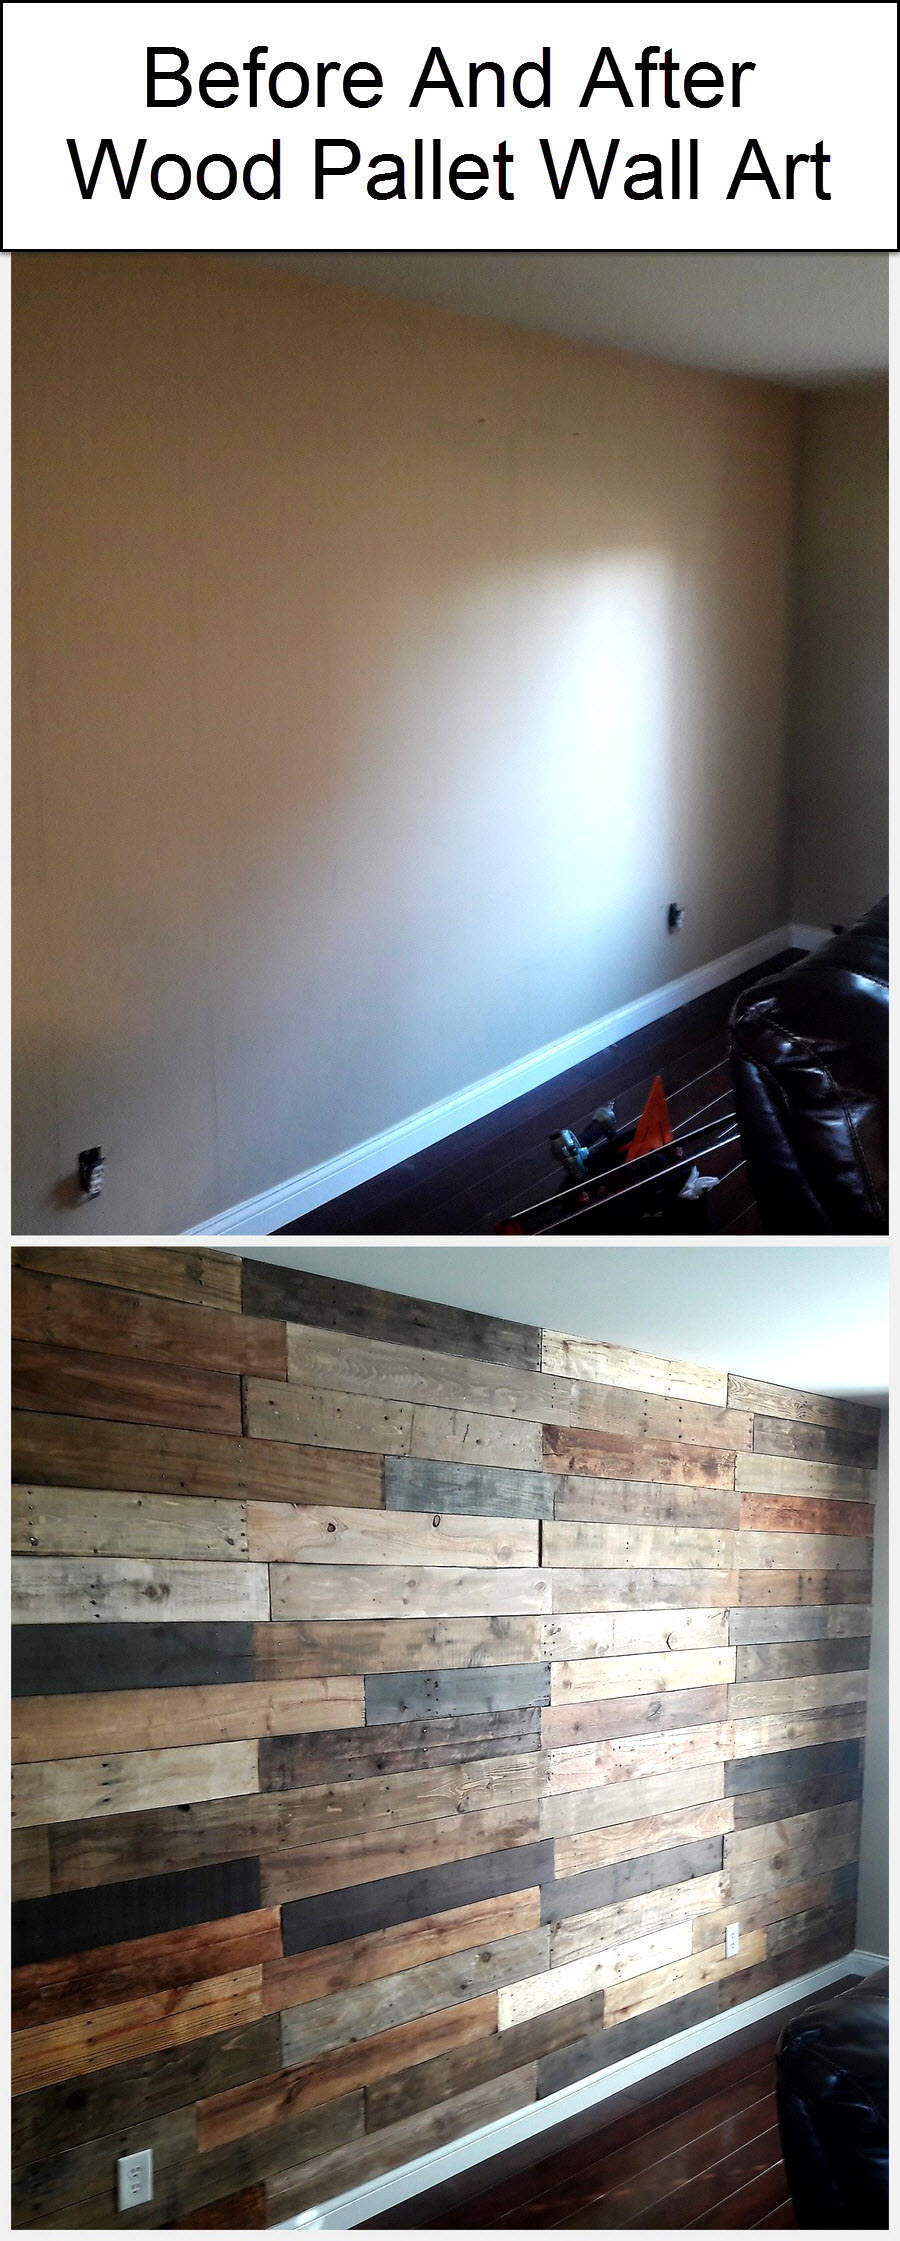 Before And After Wood Pallet Wall Art Pallet Ideas